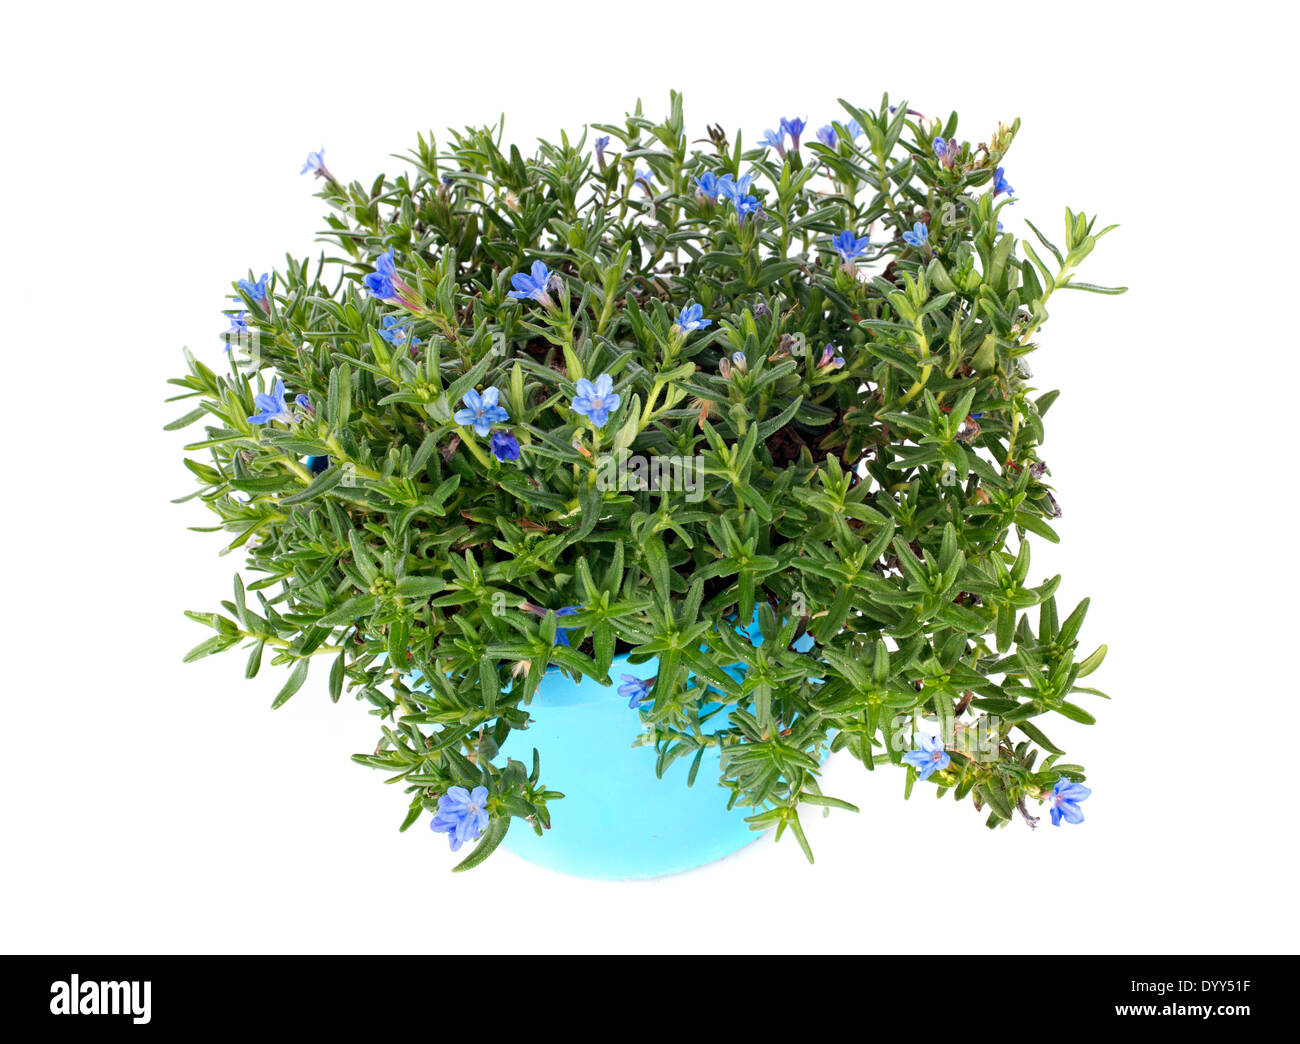 Lithodora diffusa Heavenly Blue flowers in front of white background Stock Photo